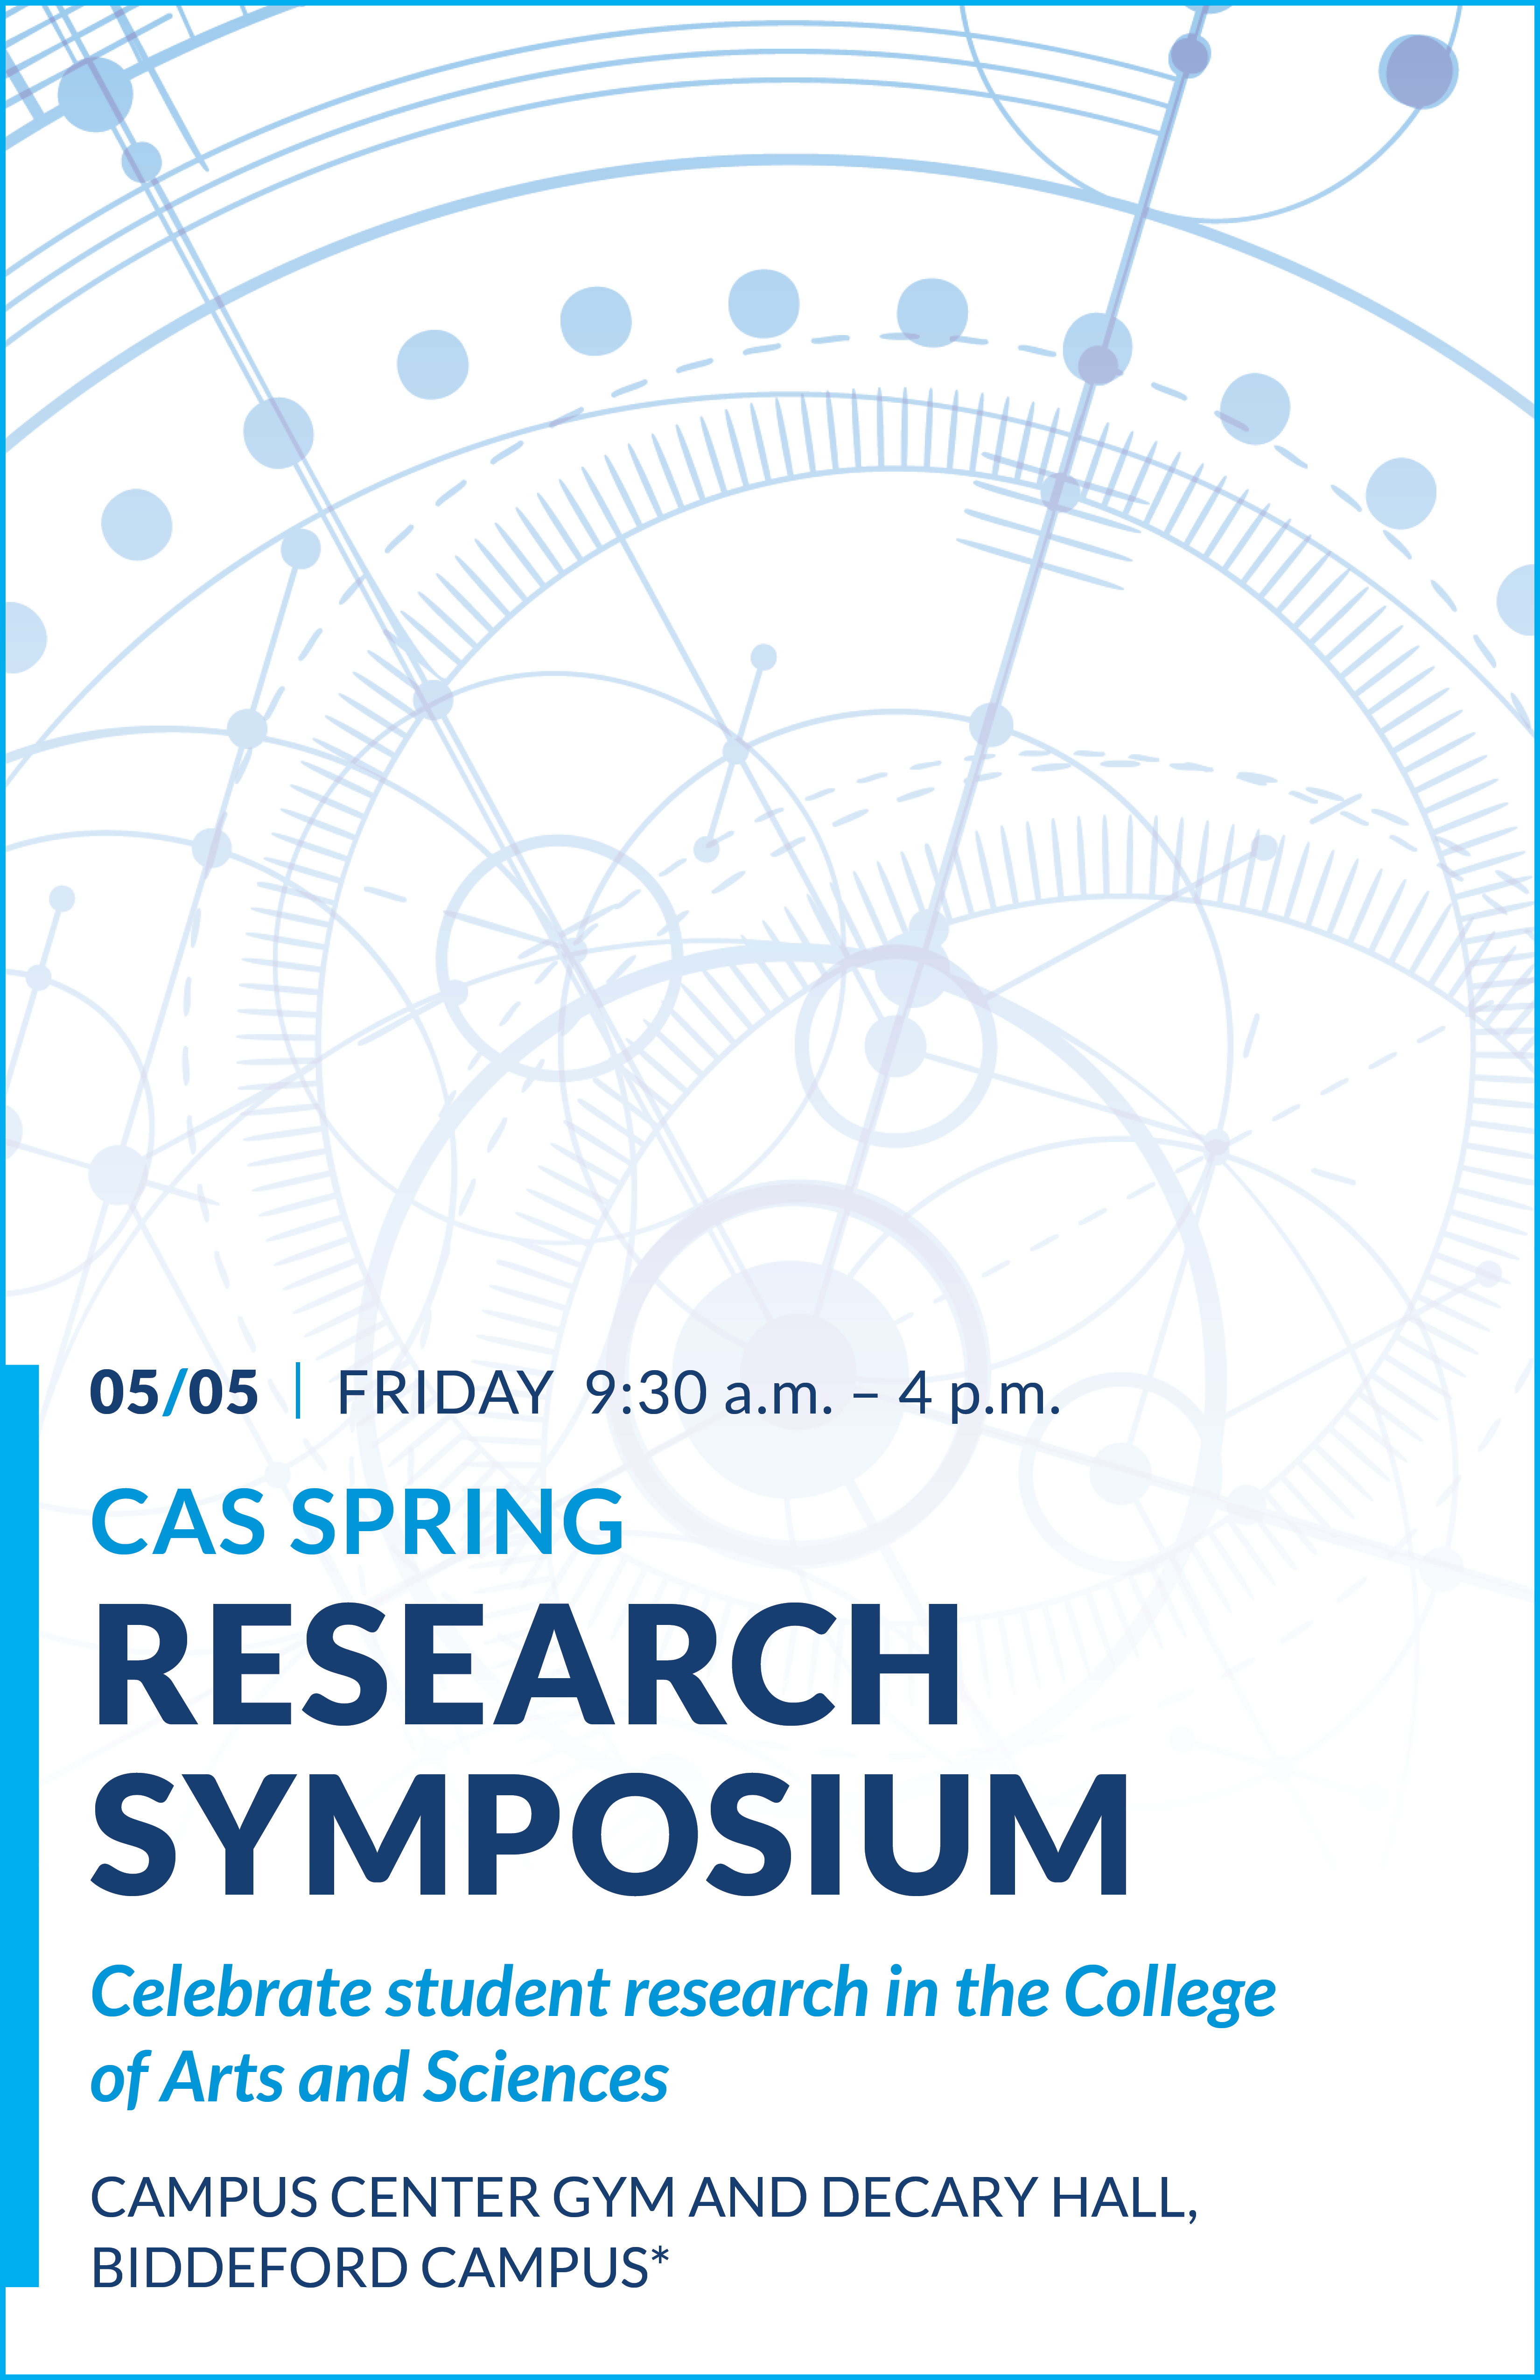 Poster for the 2023 C A S Spring Research Symposium